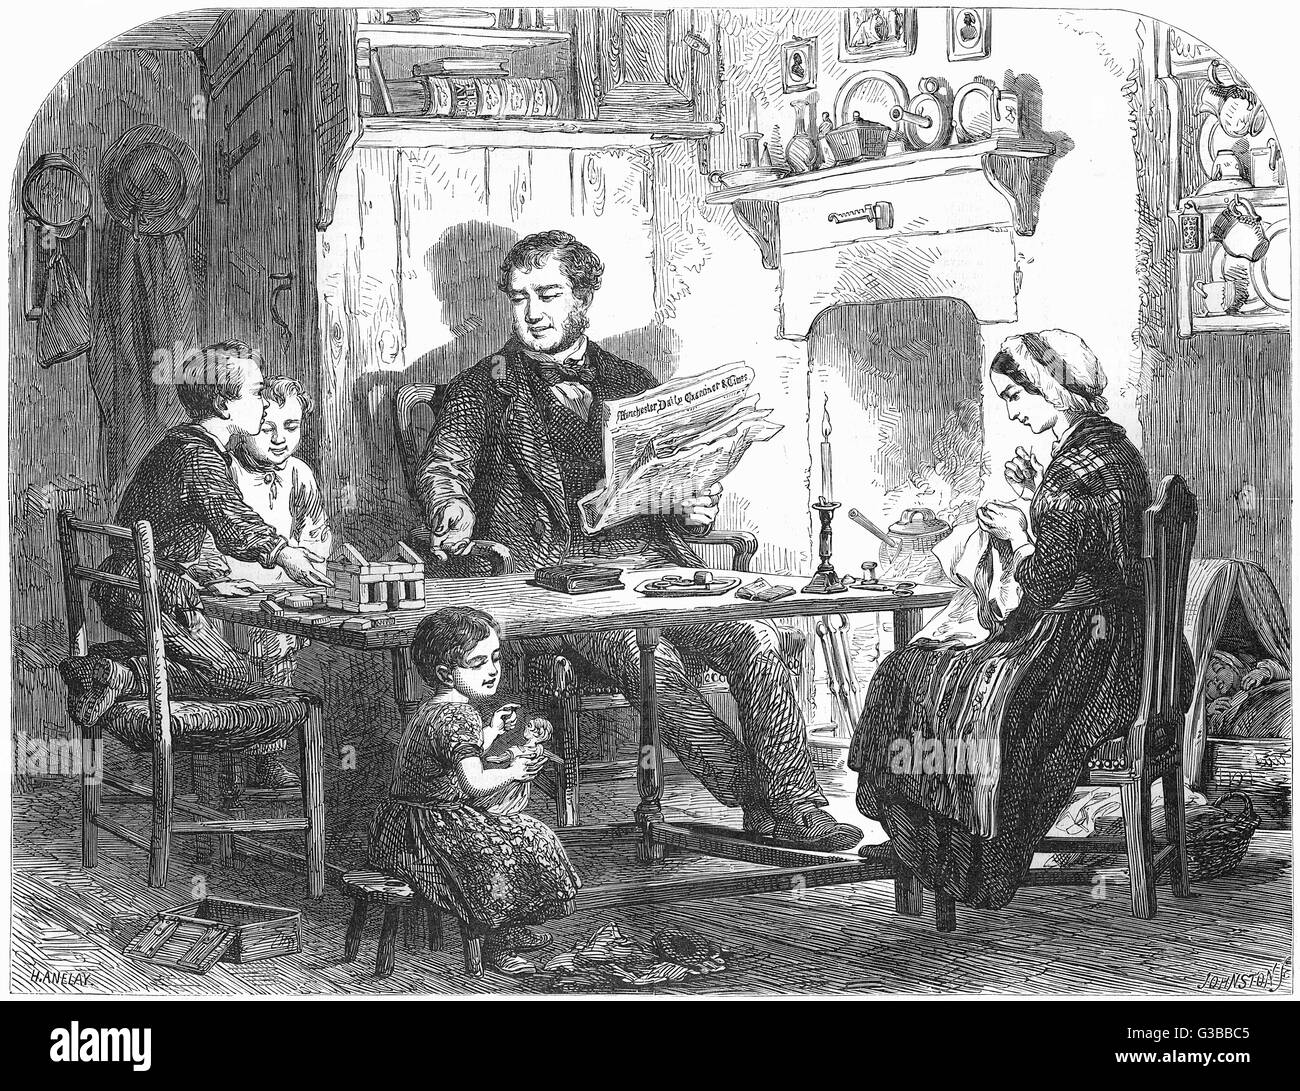 Lancashire working man in his own home 1861 Stock Photo